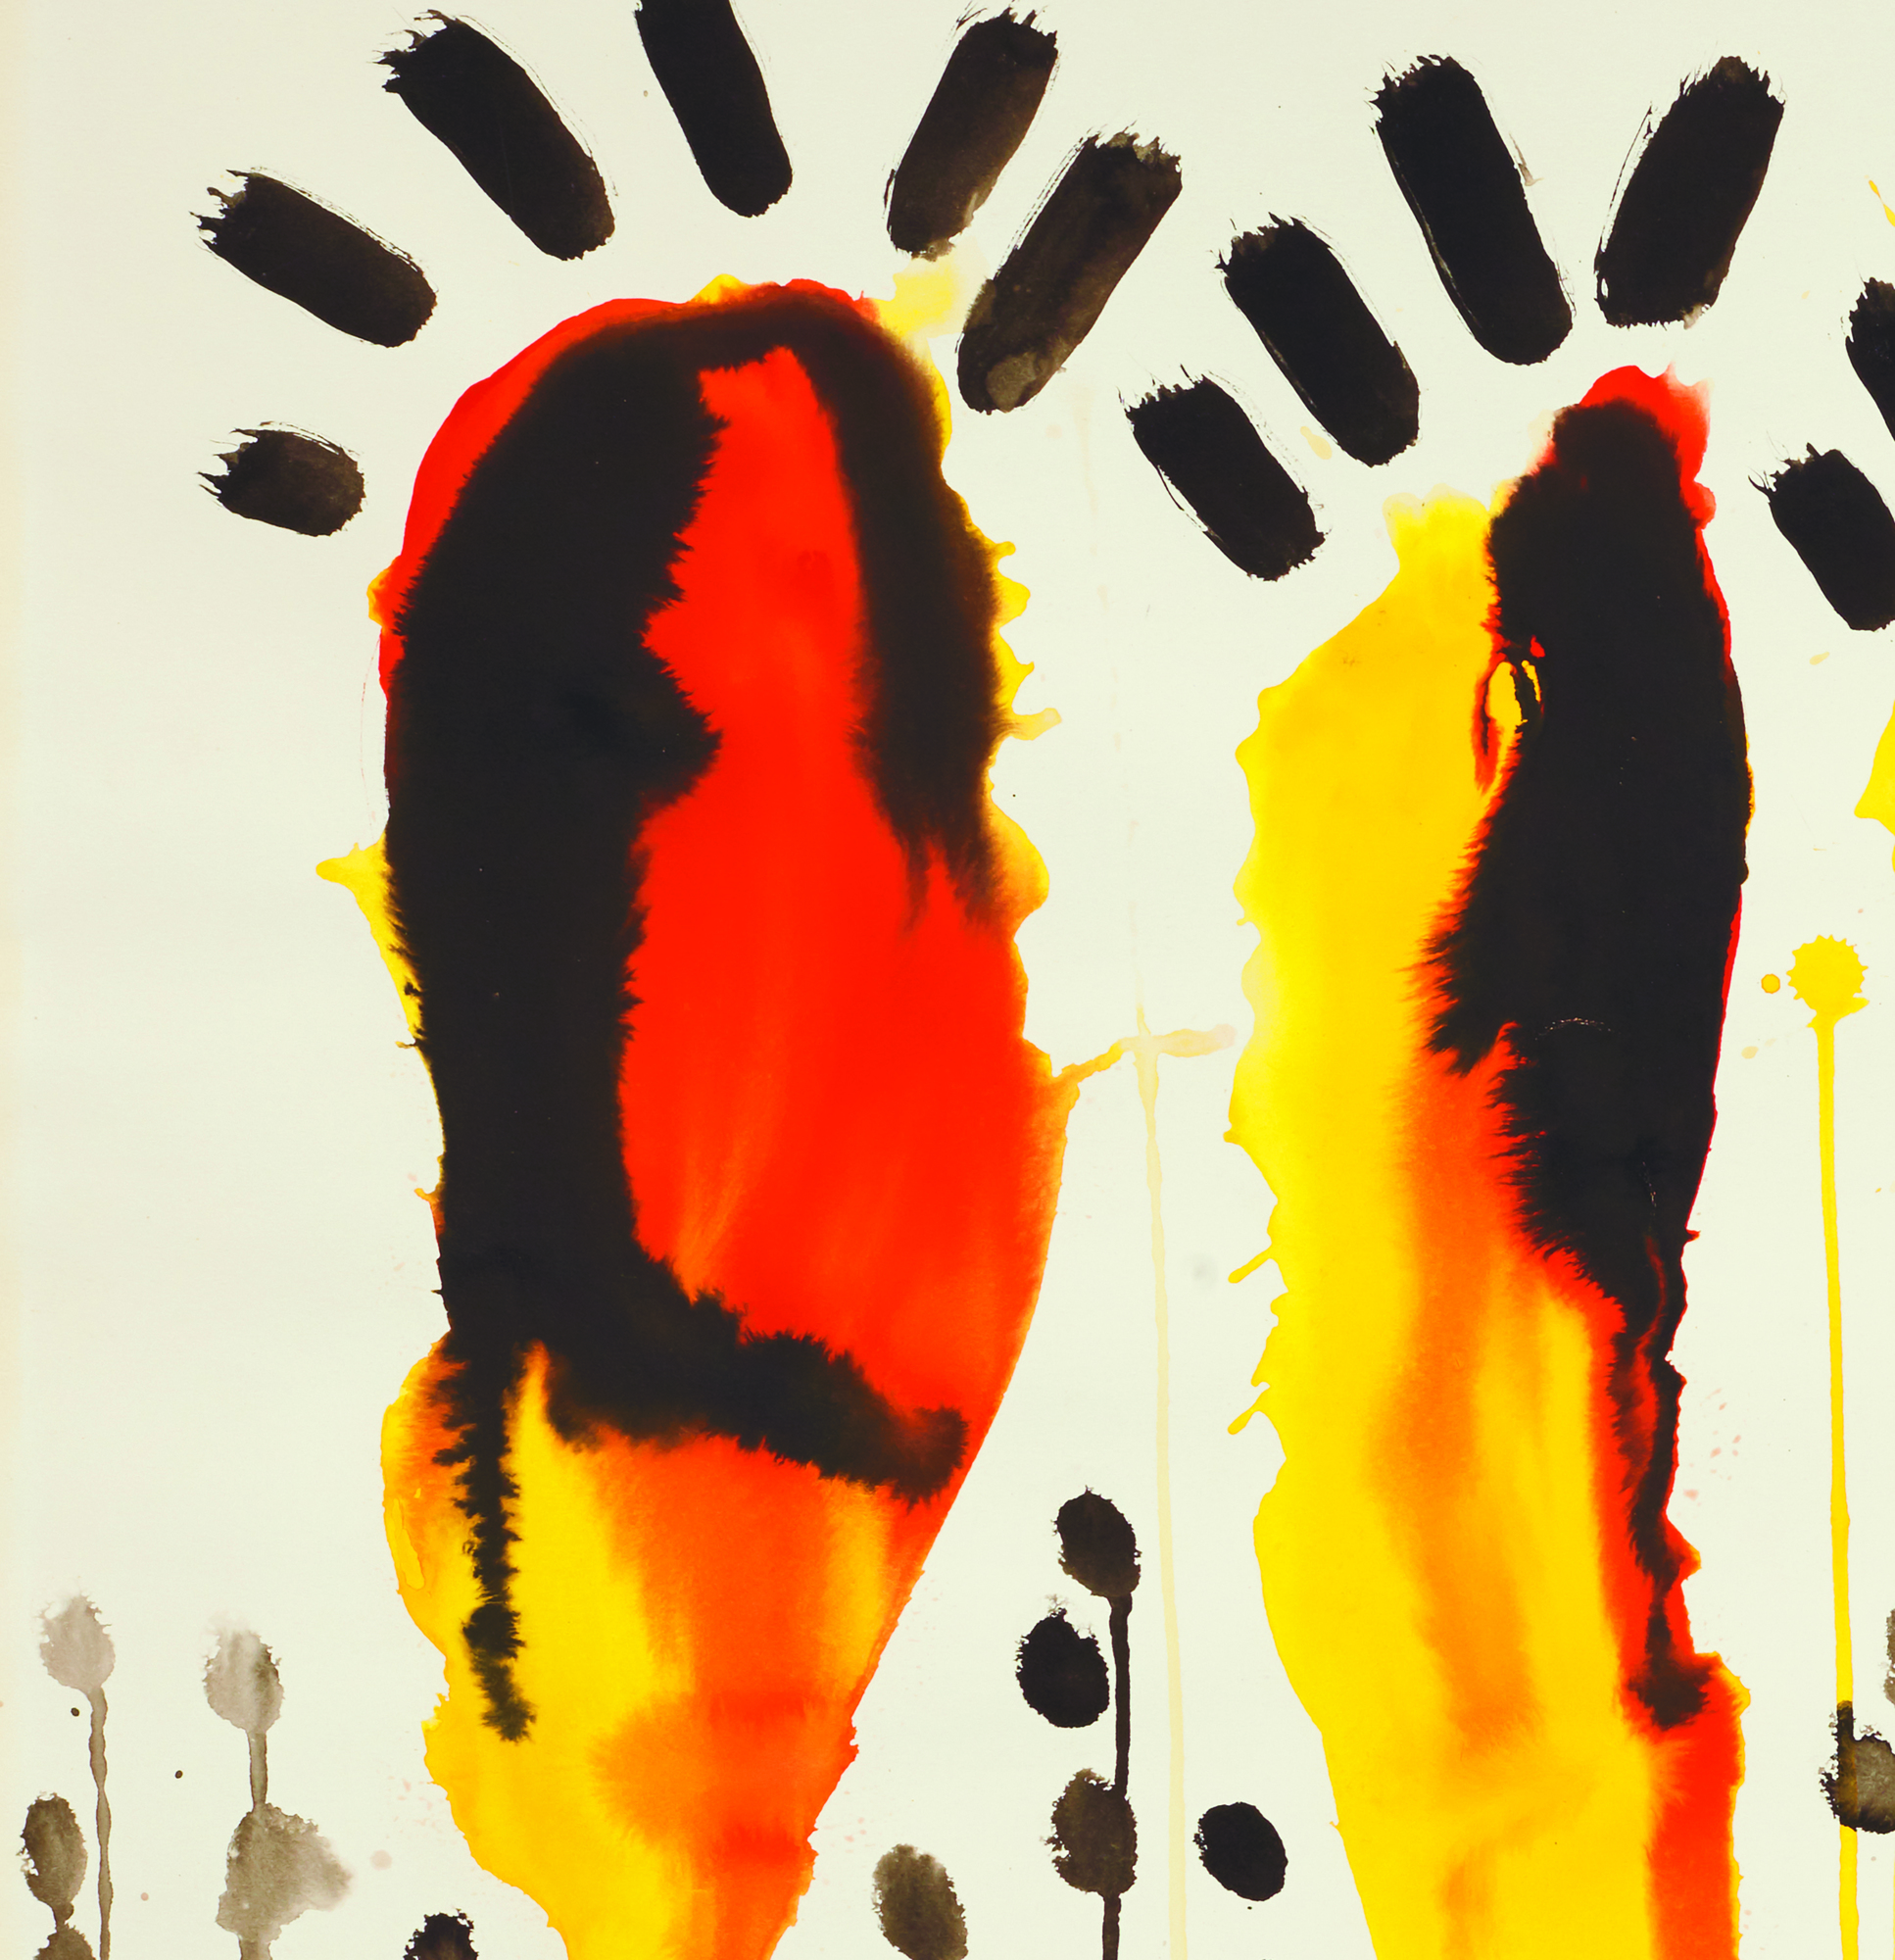 ALEXANDER CALDER - Tracks - gouache and ink on paper - 29 3/8 x 41 1/8 in.